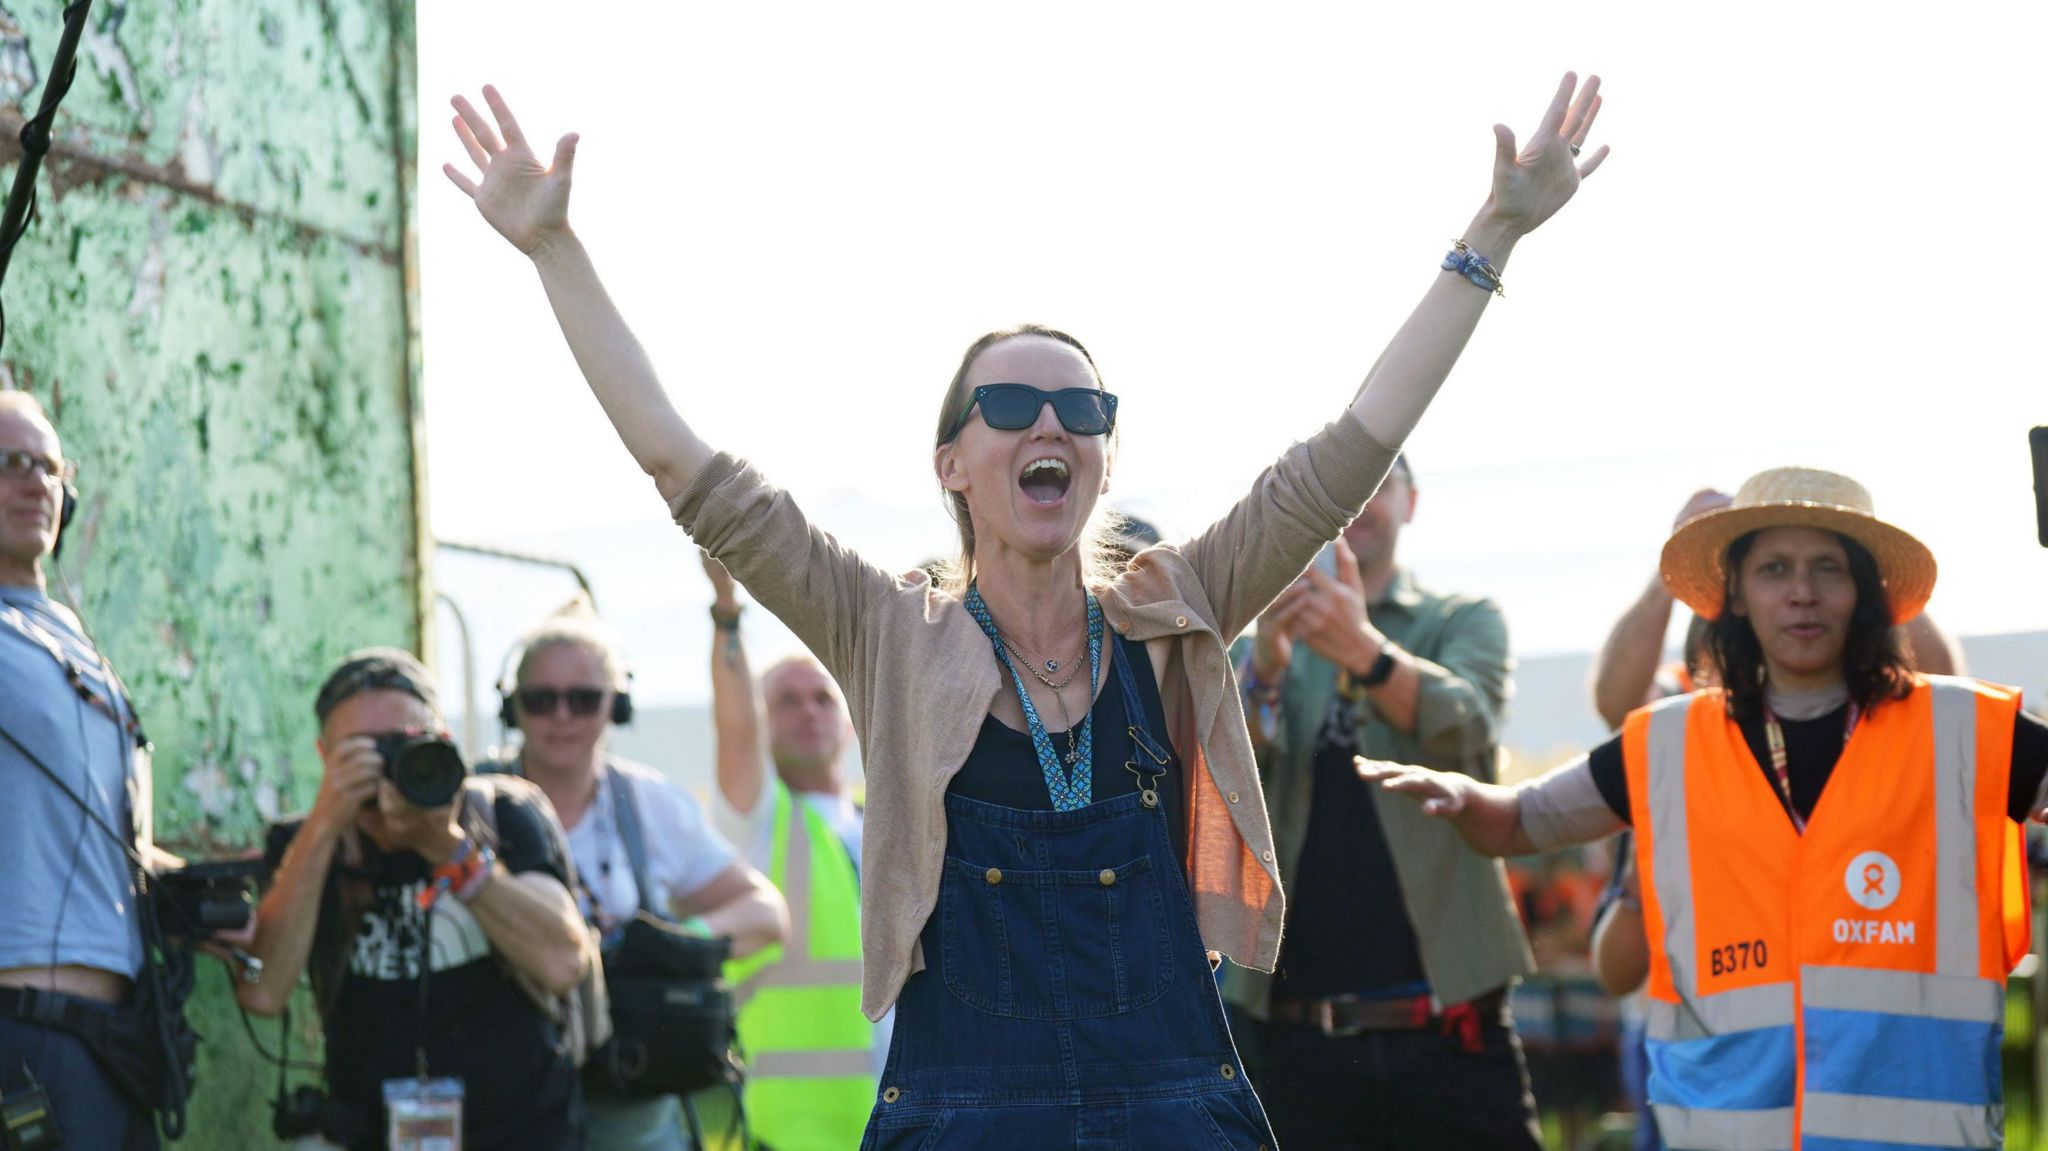 Emily Eavis opening the gates to the festival. She is talking with her hands held up in the air, as people film and take pictures behind her. 